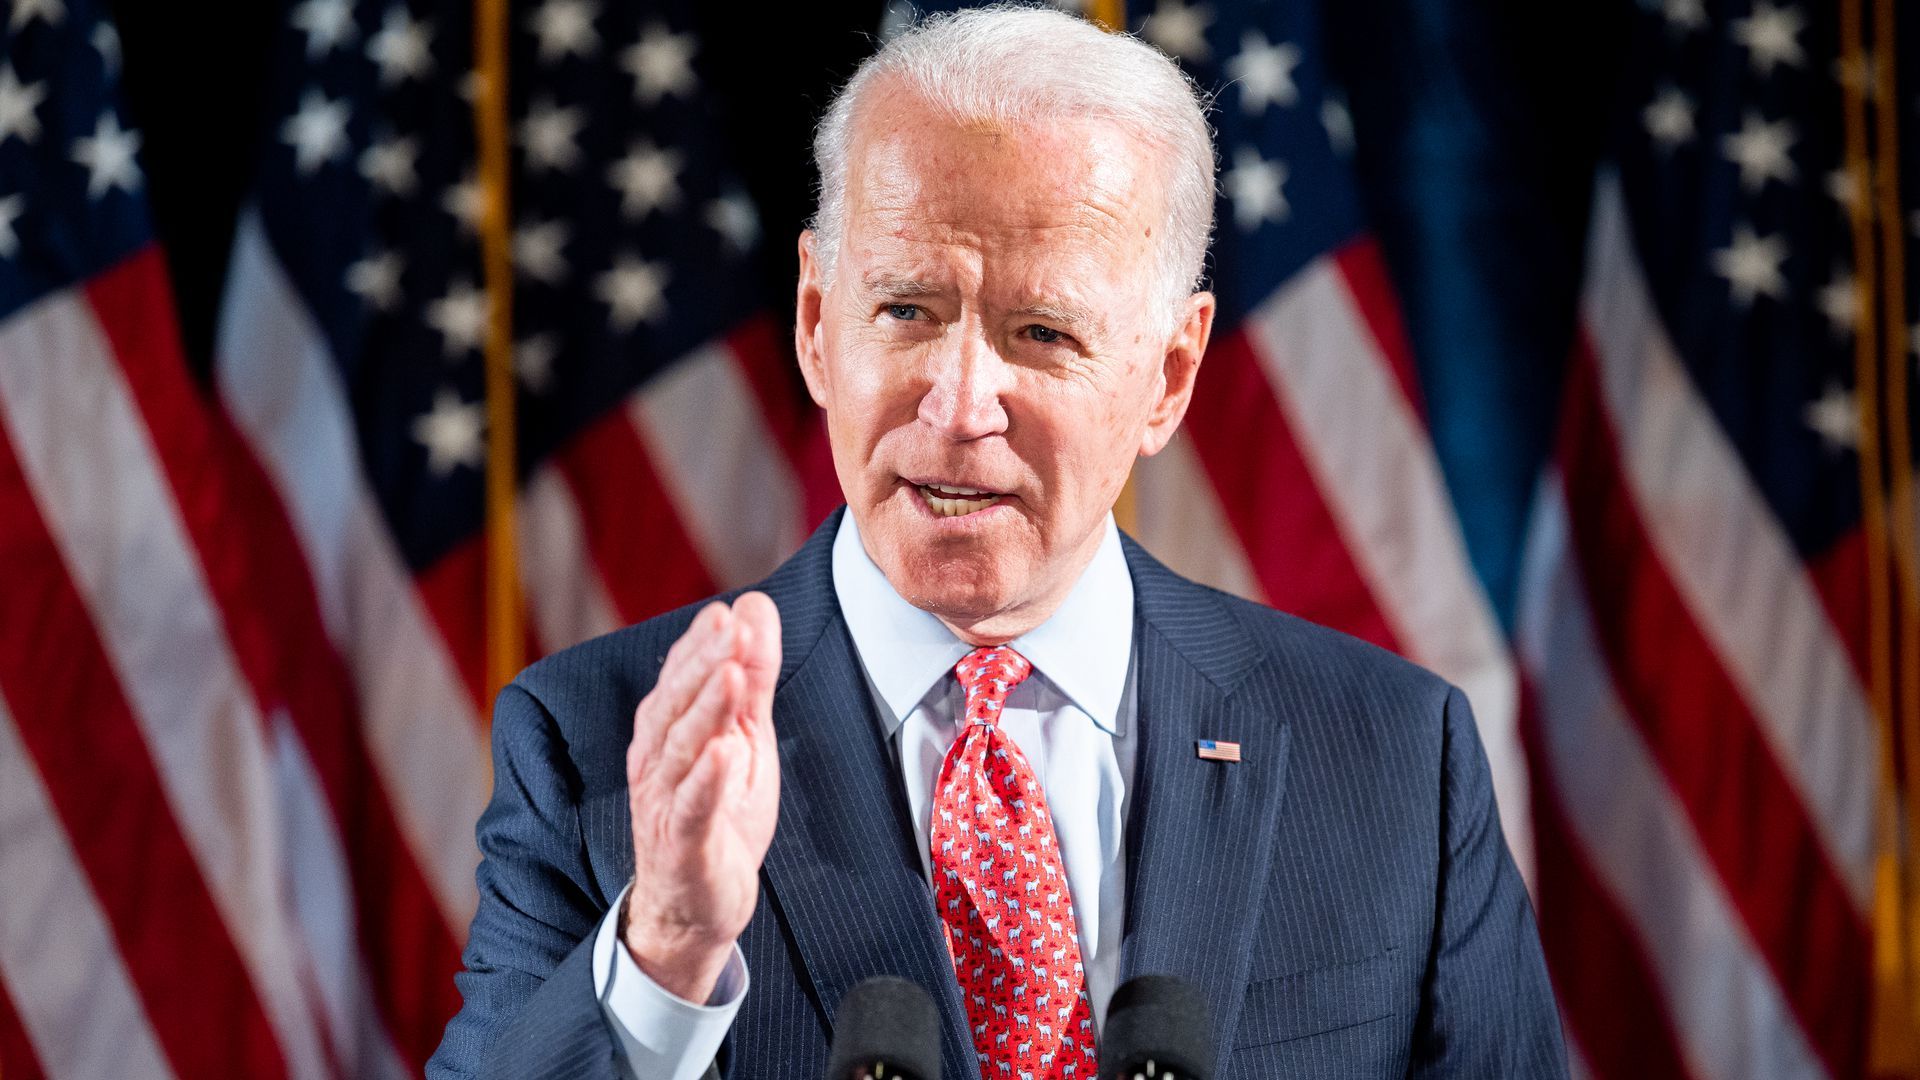 Scientists and climate experts endorse Joe Biden for president